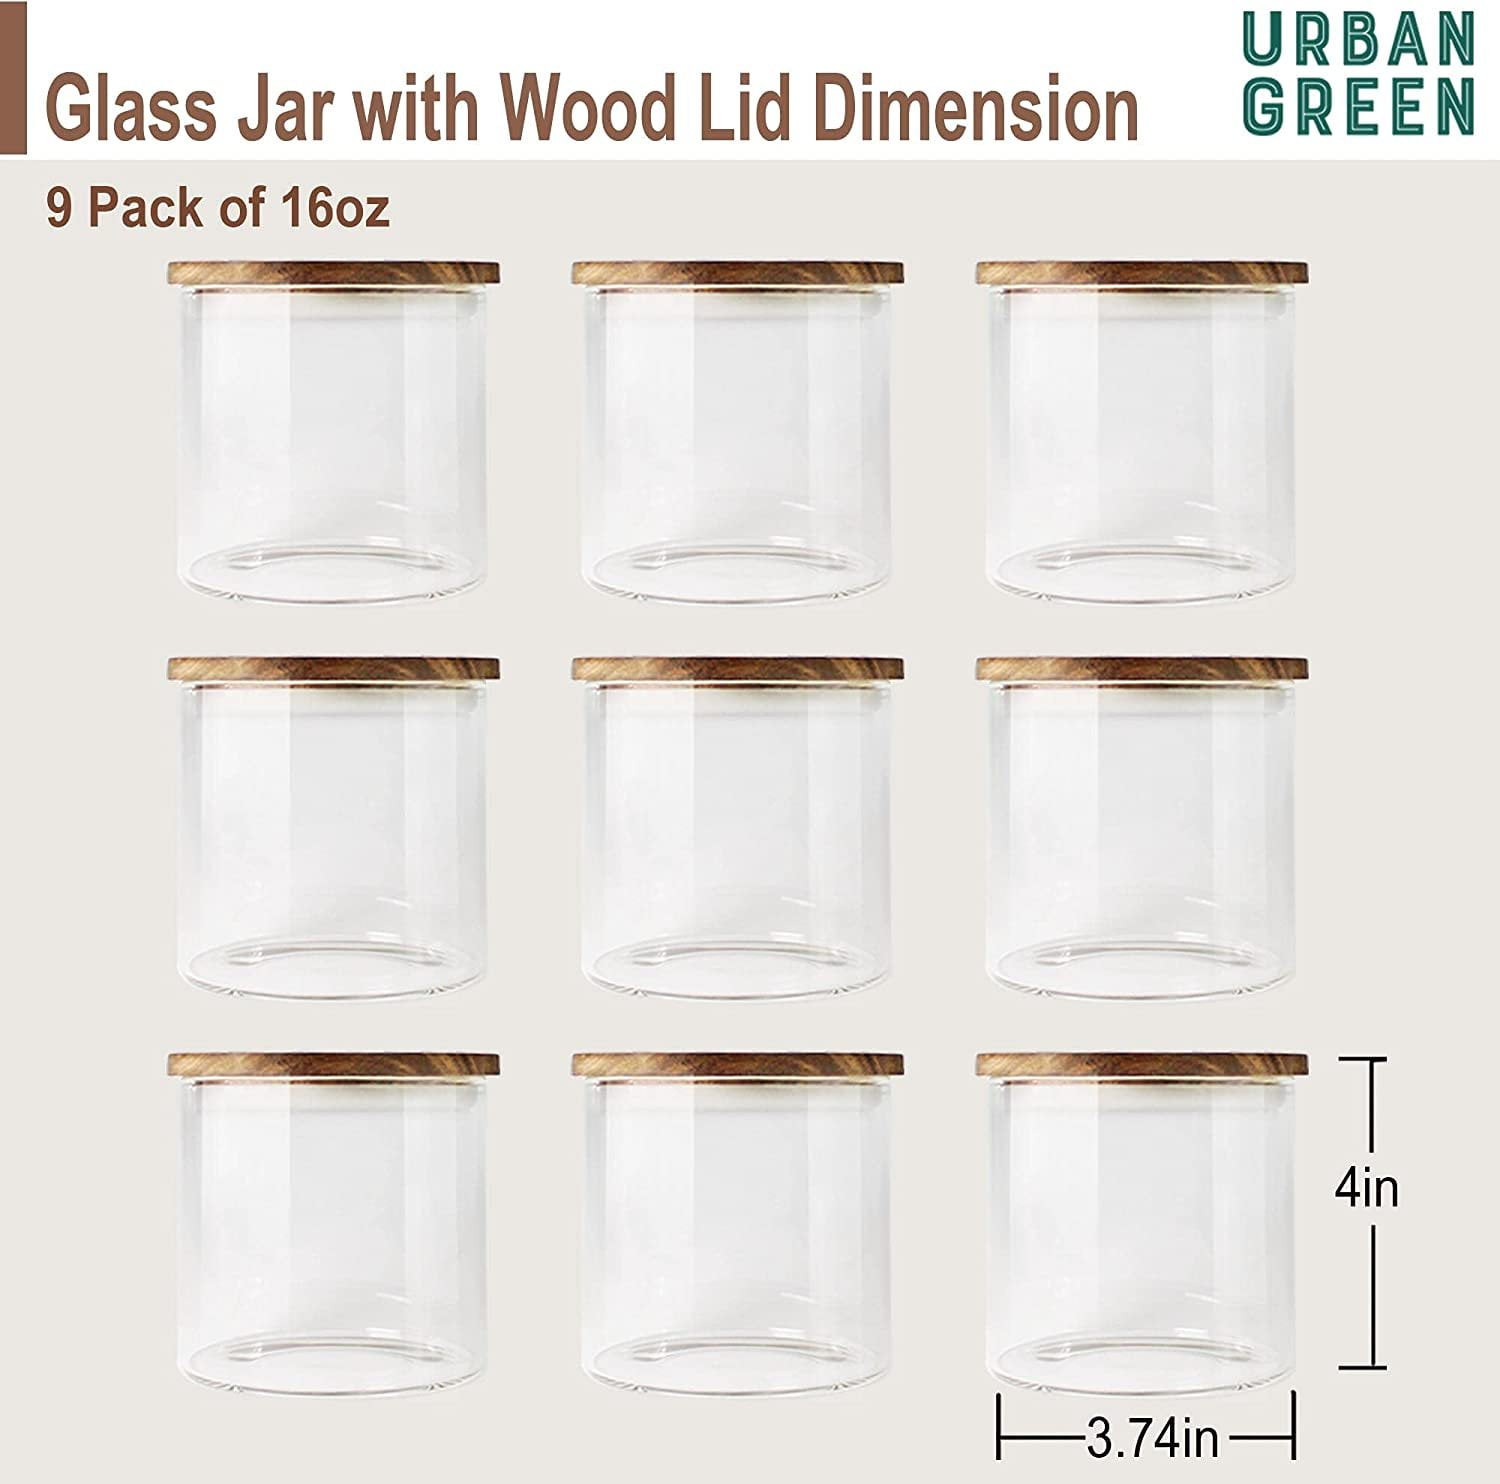 Urban Green Glass Containers Review 2022